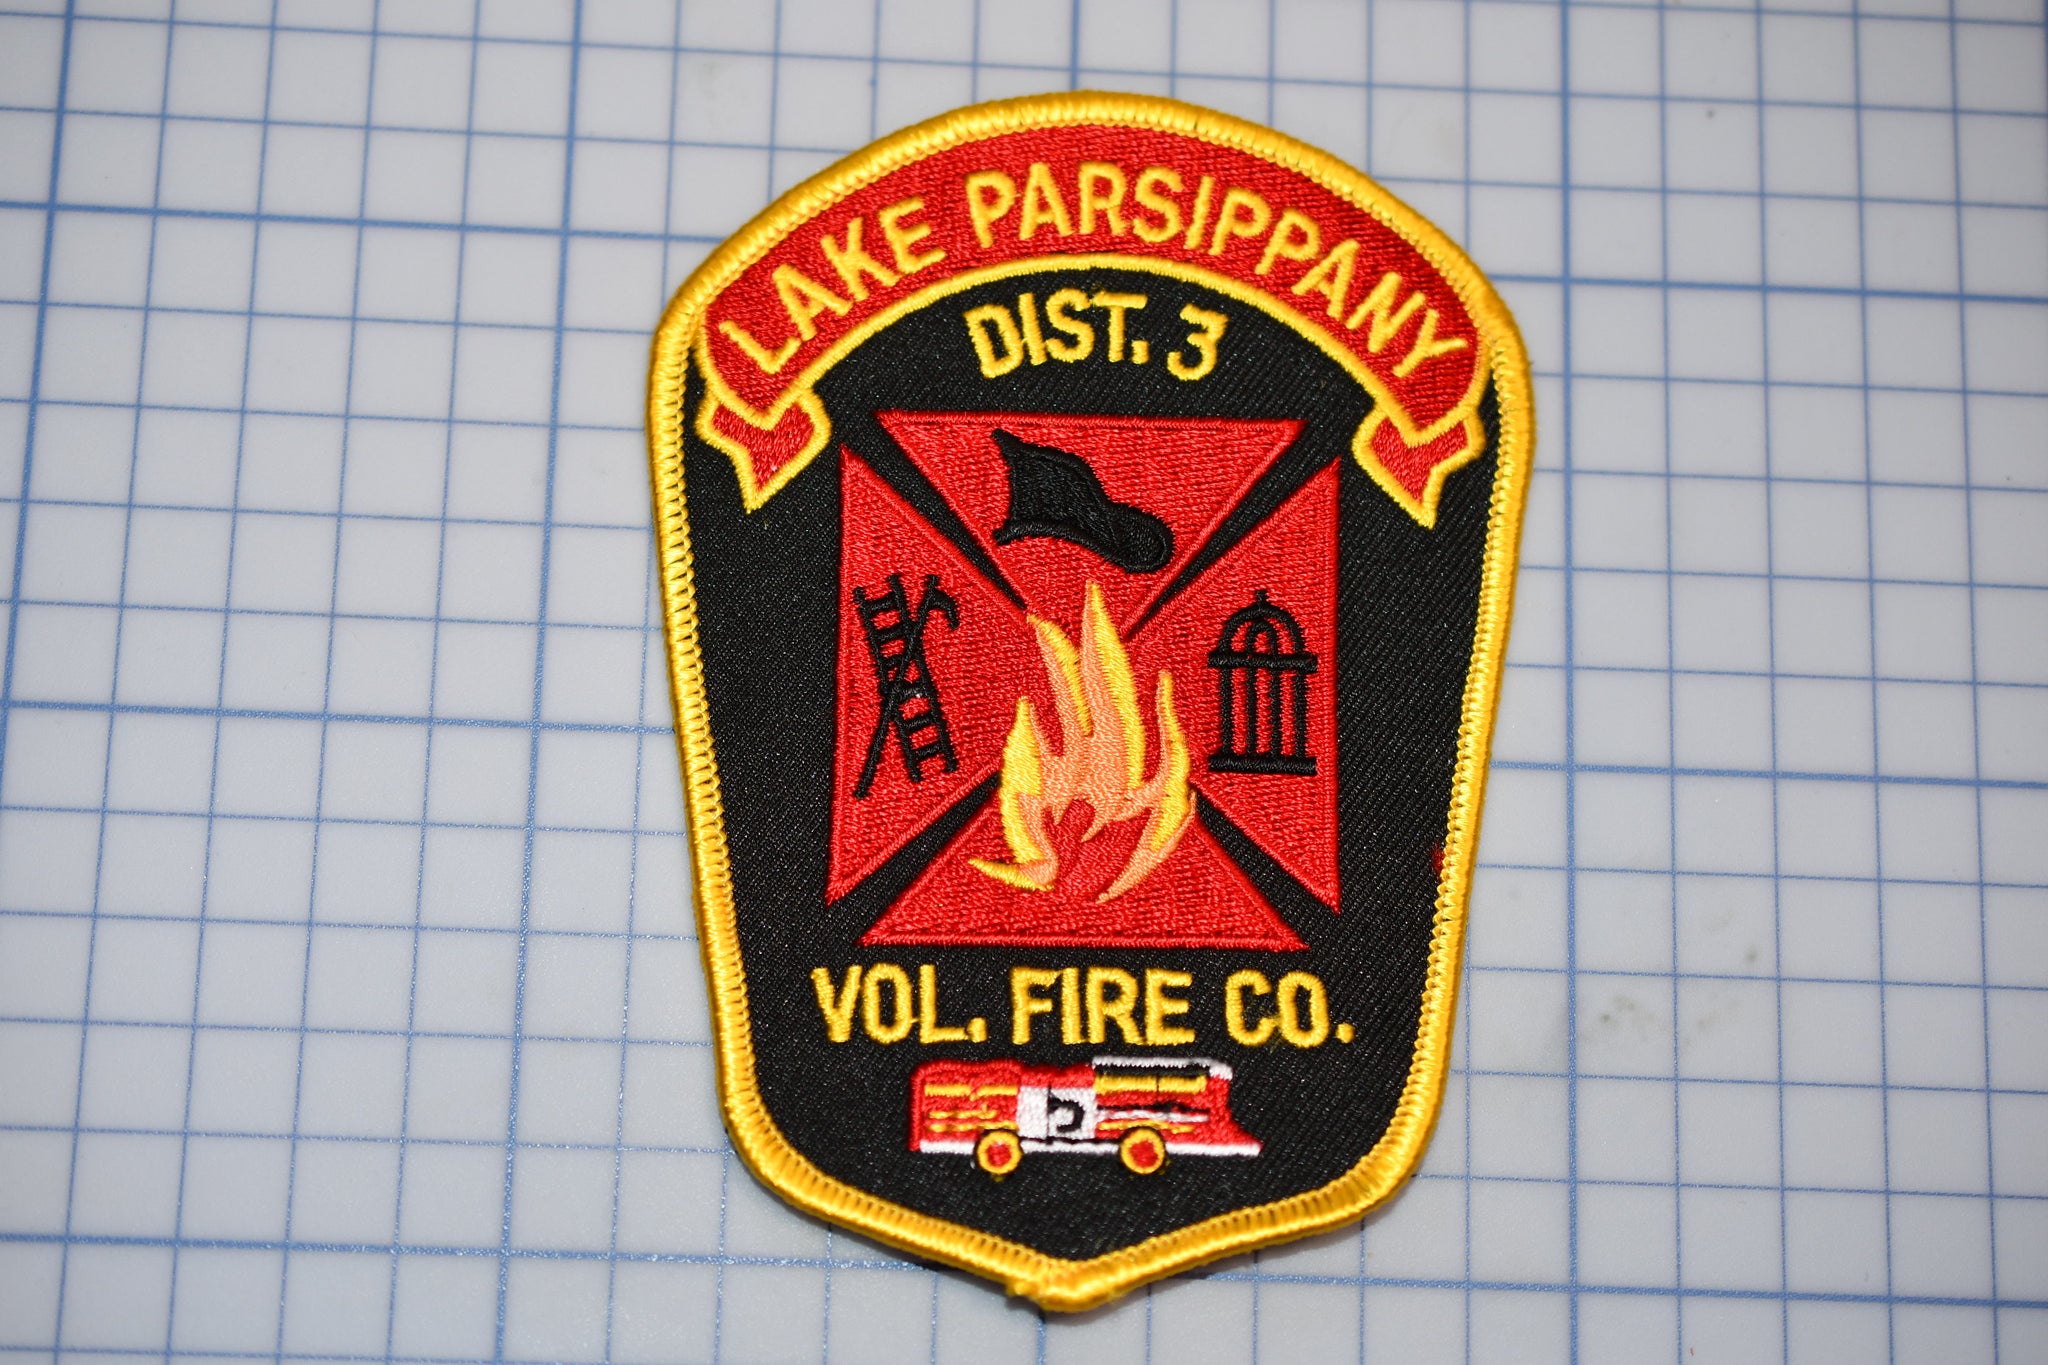 Lake Parsippany New Jersey Volunteer Fire Co. Patch (B29-356)